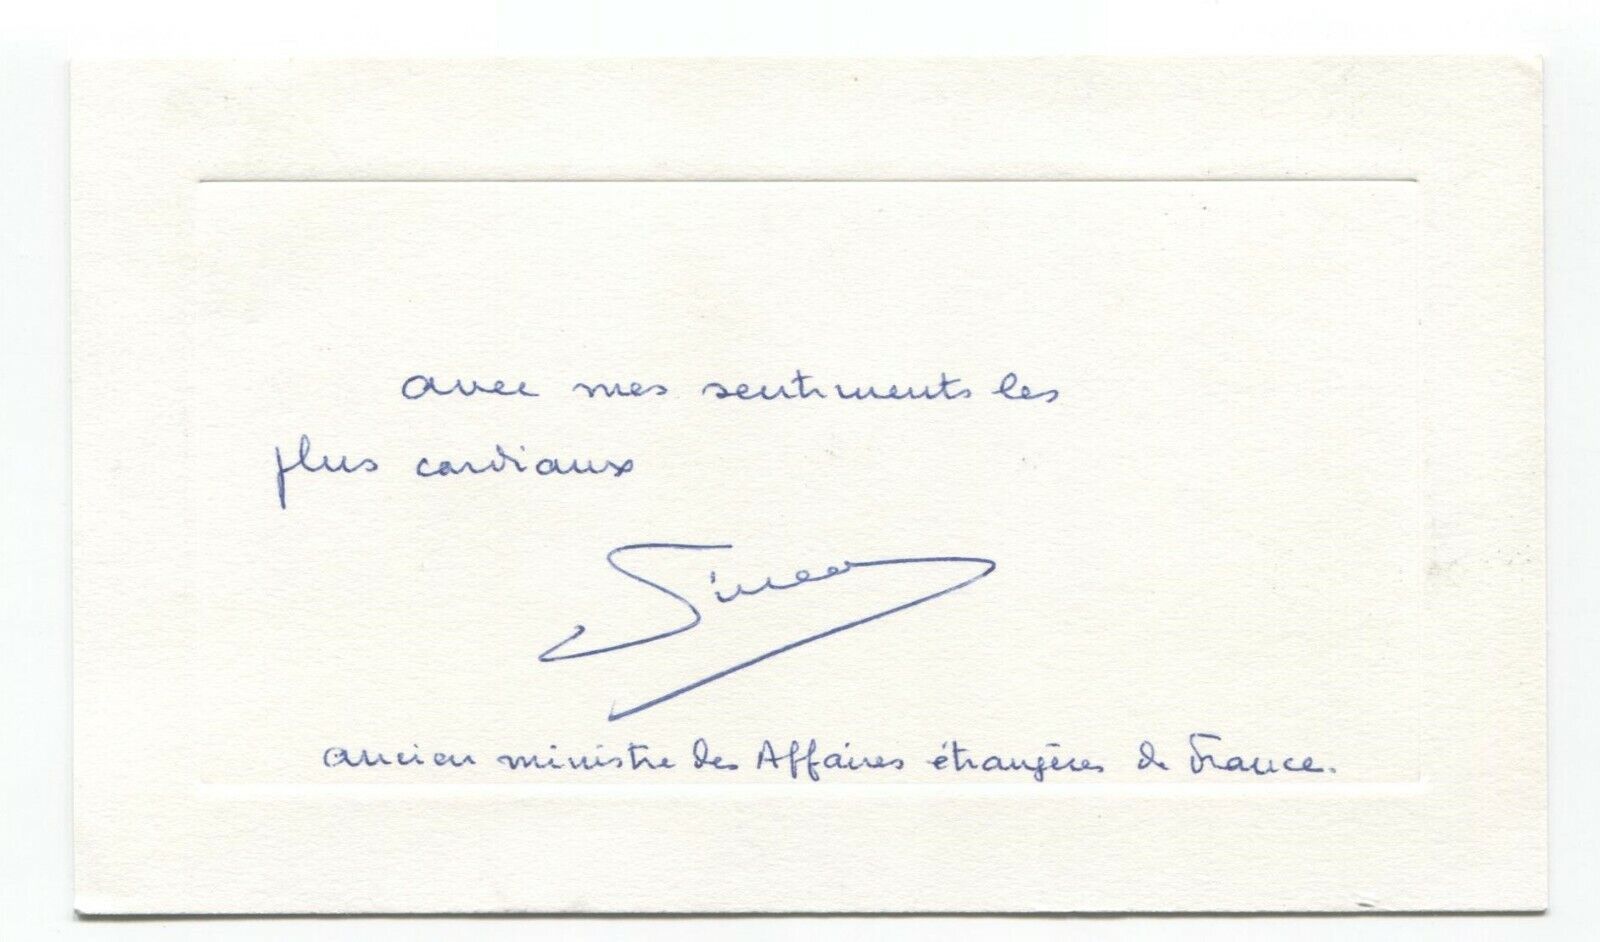 Christian Pineau Signed Card Autographed Signature French Minister WWII Hero